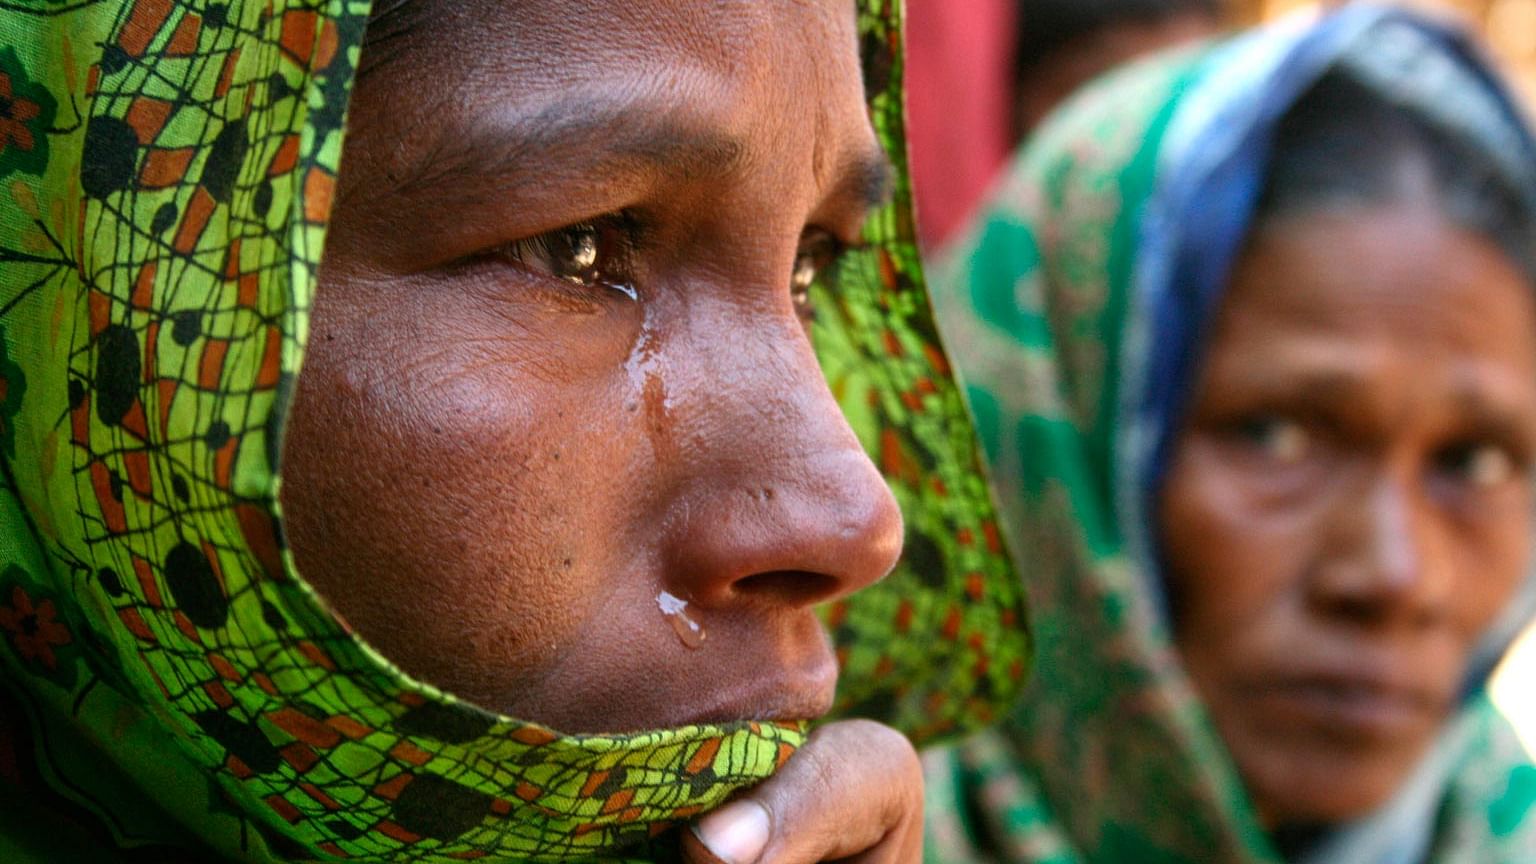 Farida Bibi (left), the elder sister of 17-year-old boy Sheik Sailm who died in political clashes, cries in Nandigram, about 150 km (93 miles) north of Kolkata, 8 January 2007. (Photo: Reuters)